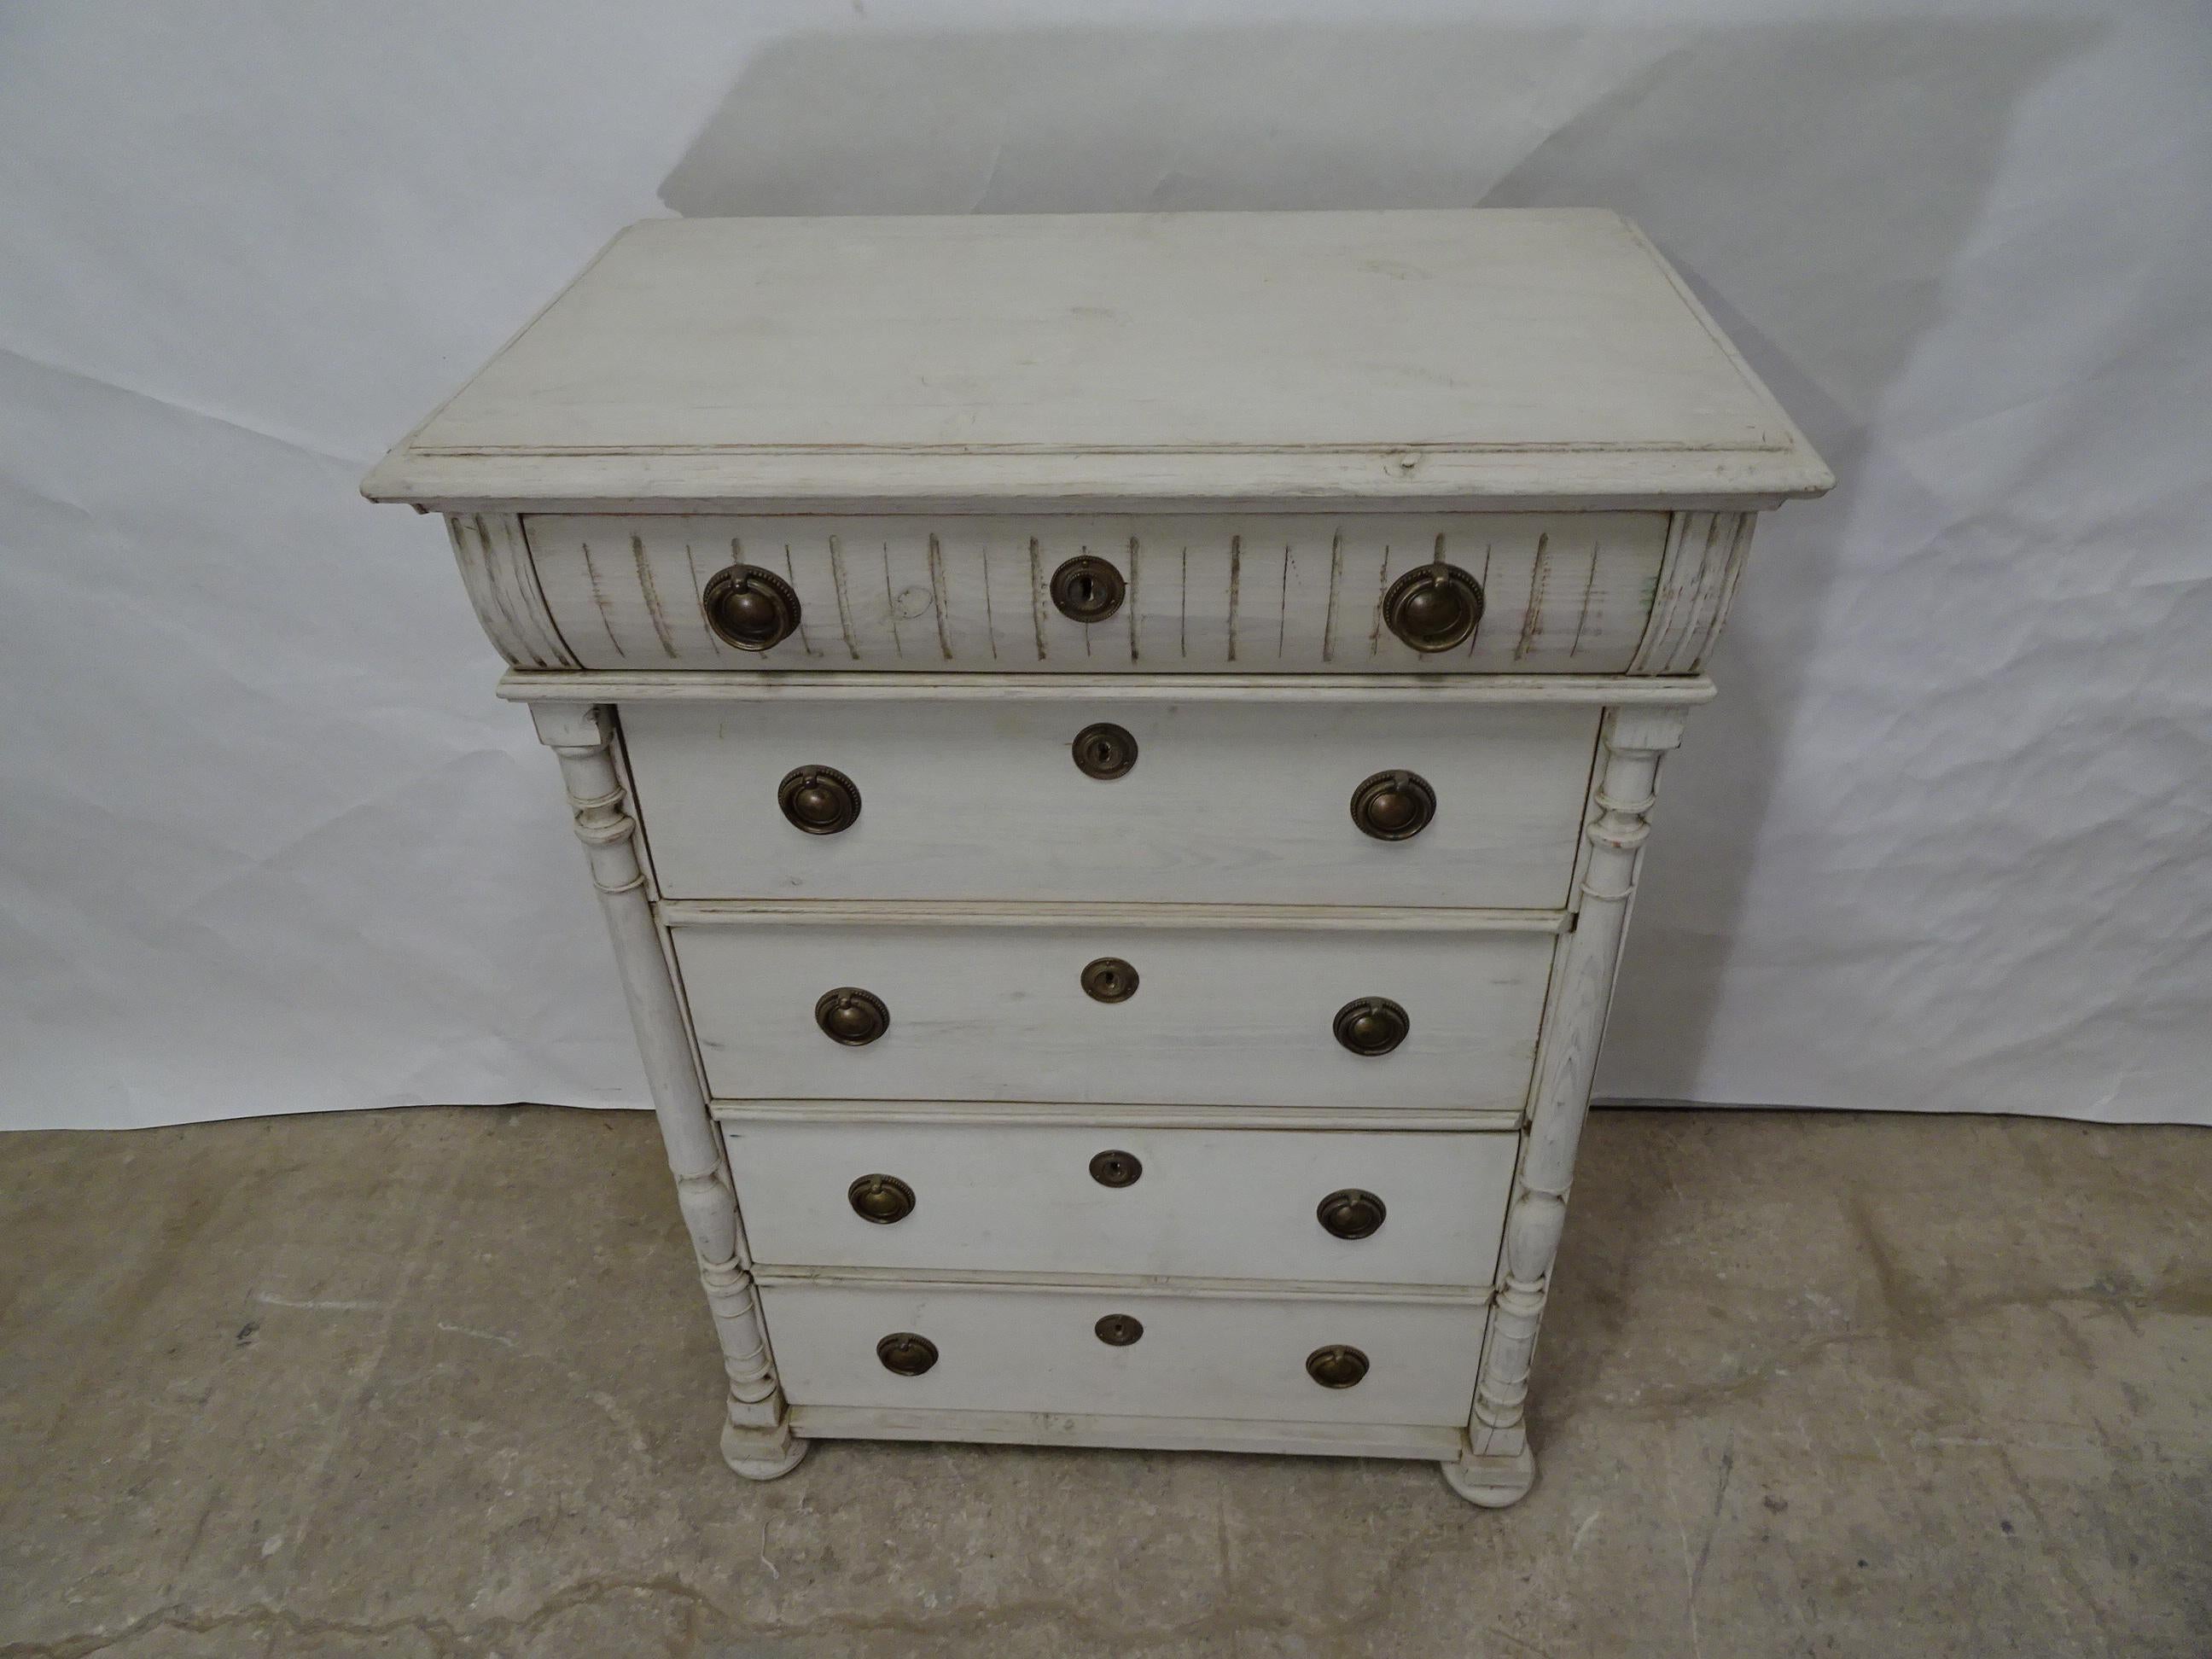 This is a Swedish Gustavian tall chest, its been restored and repainted with milk paints 